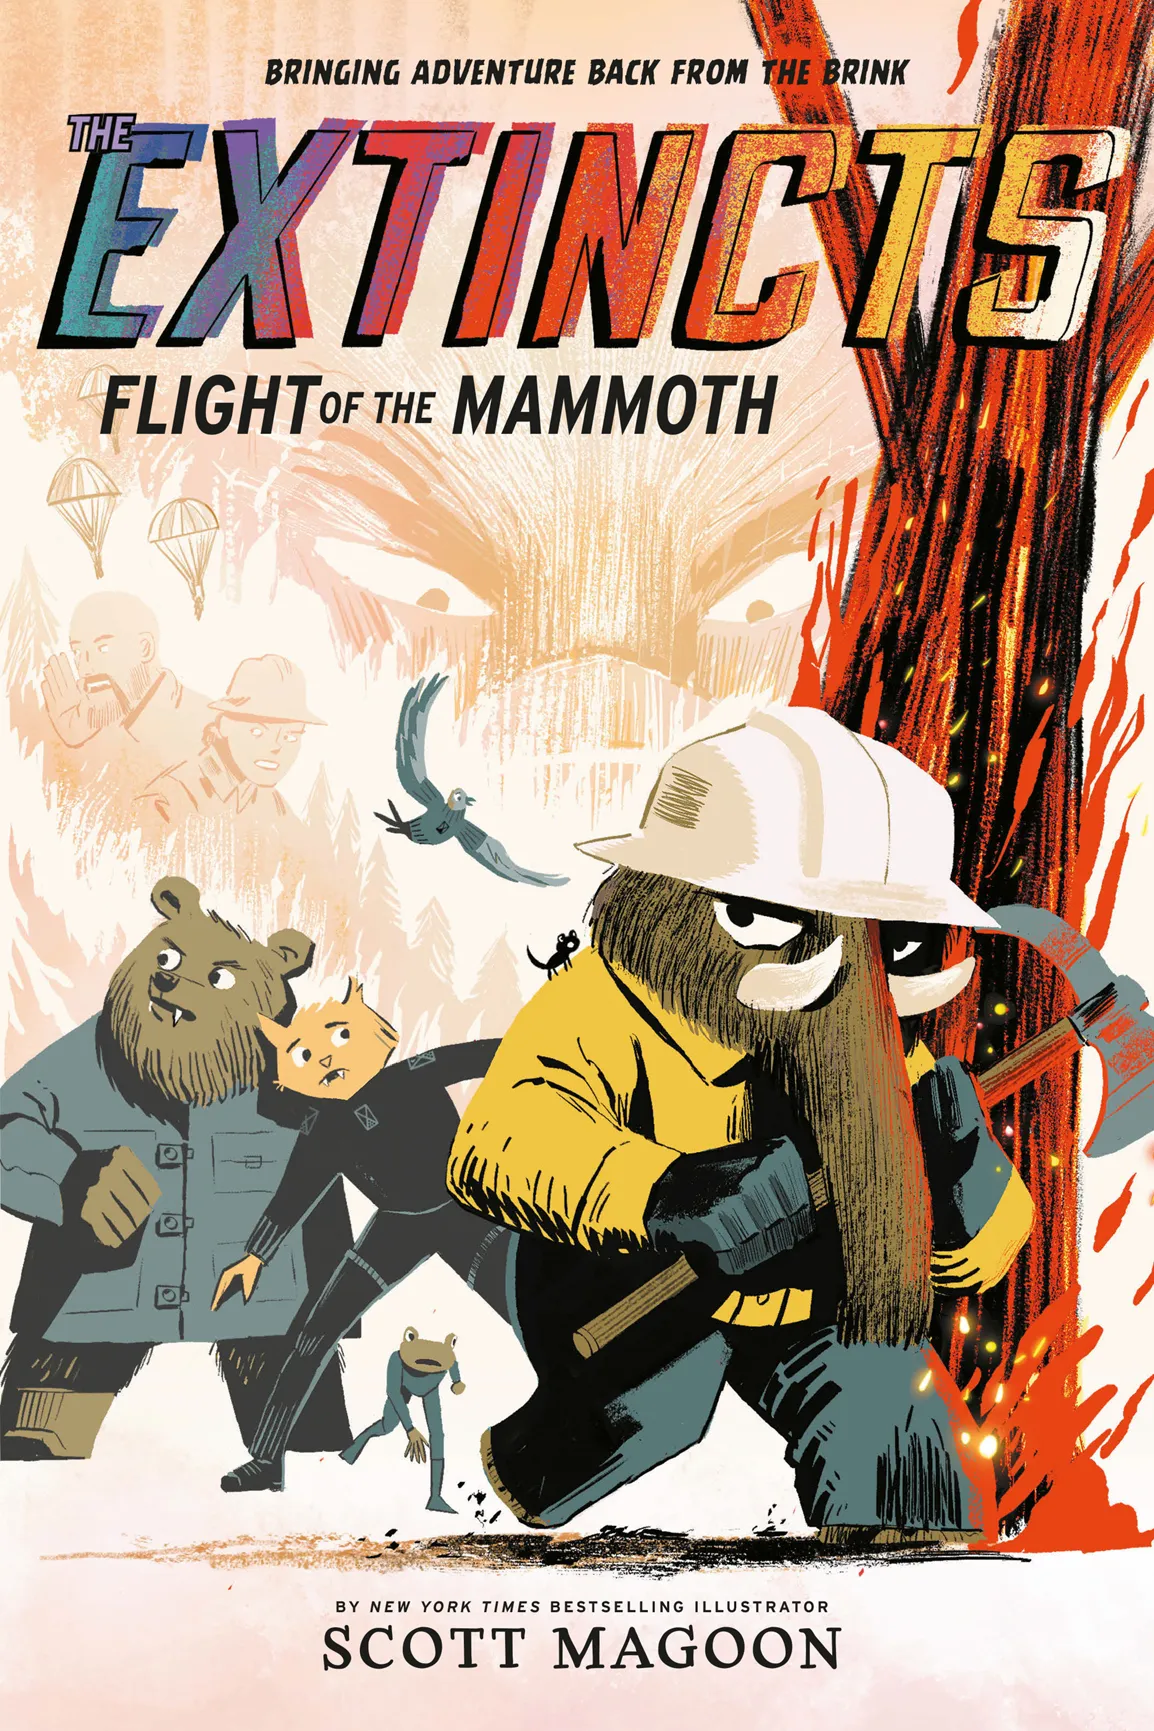 Flight of the Mammoth (The Extincts #2)